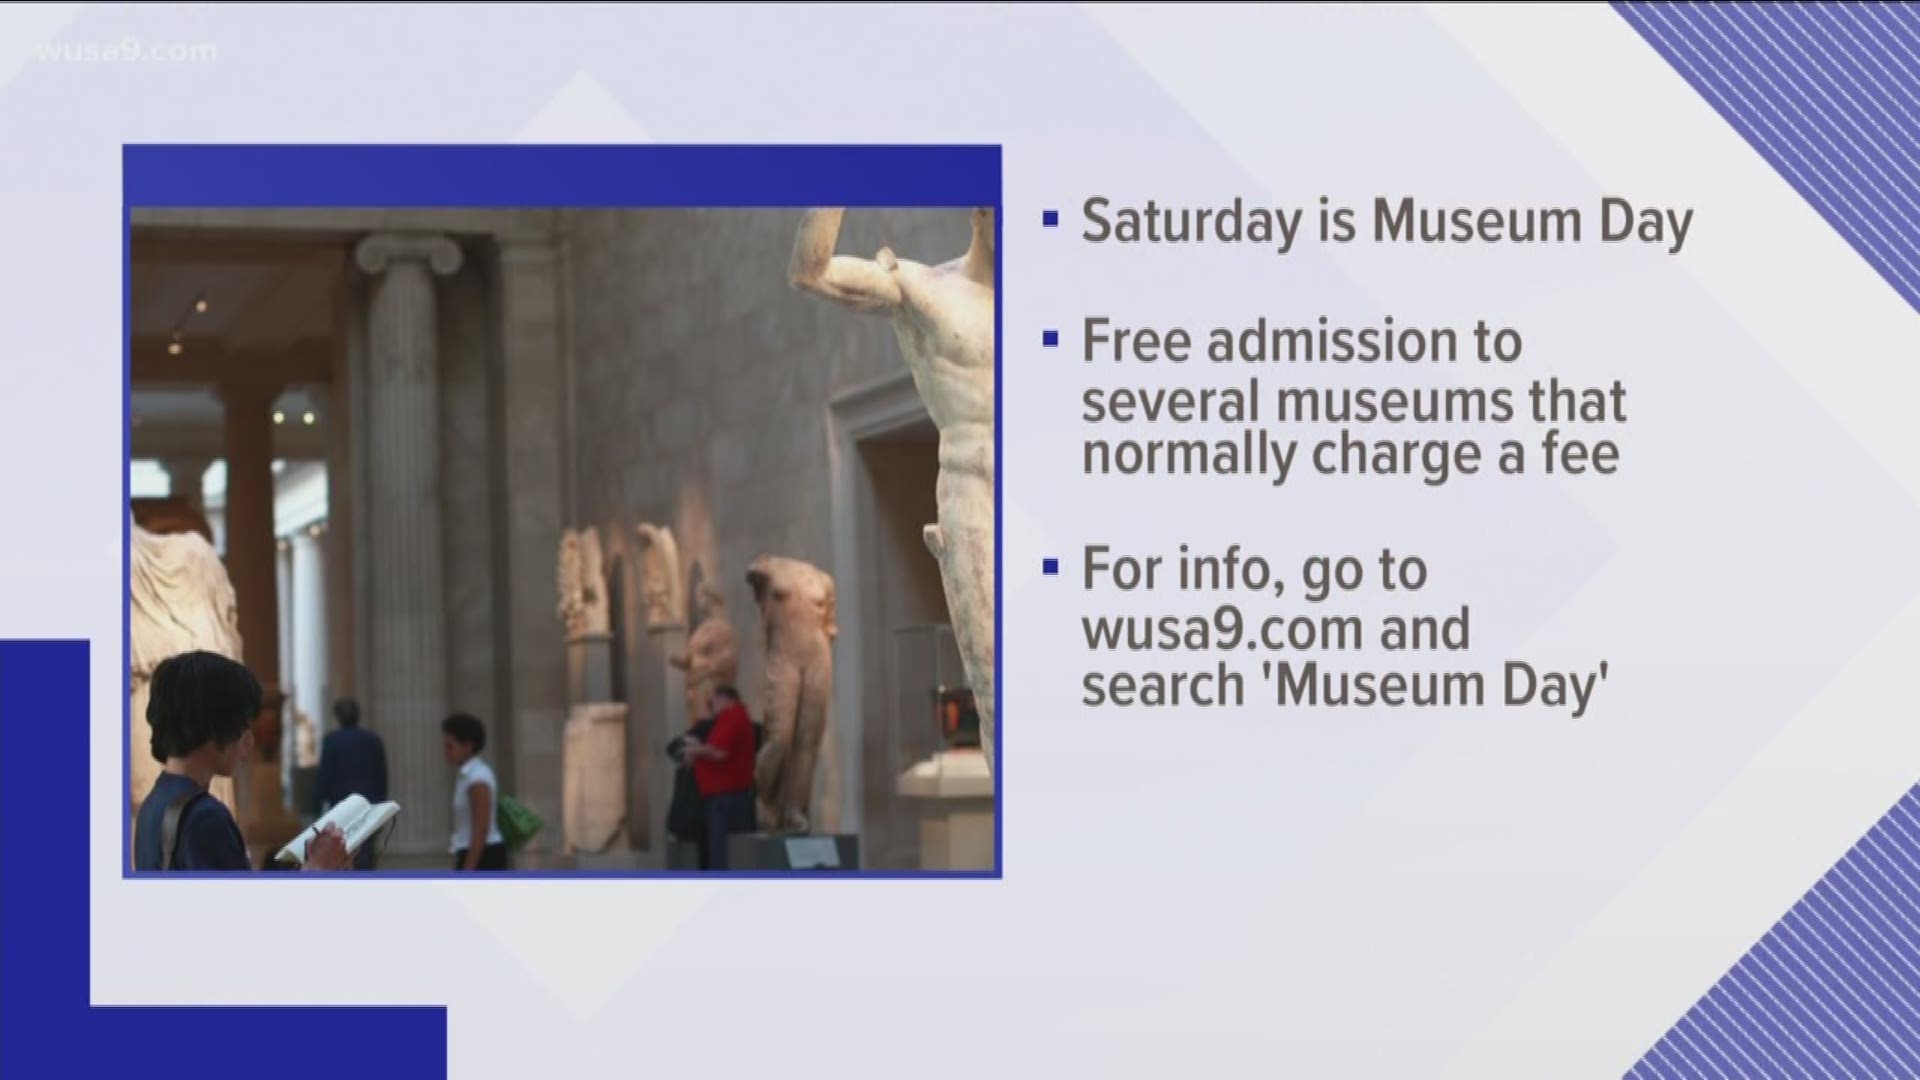 Museum Day is an annual celebration hosted by the Smithsonian Magazine. Participating museums provide free entry to anyone with a Museum Day ticket.